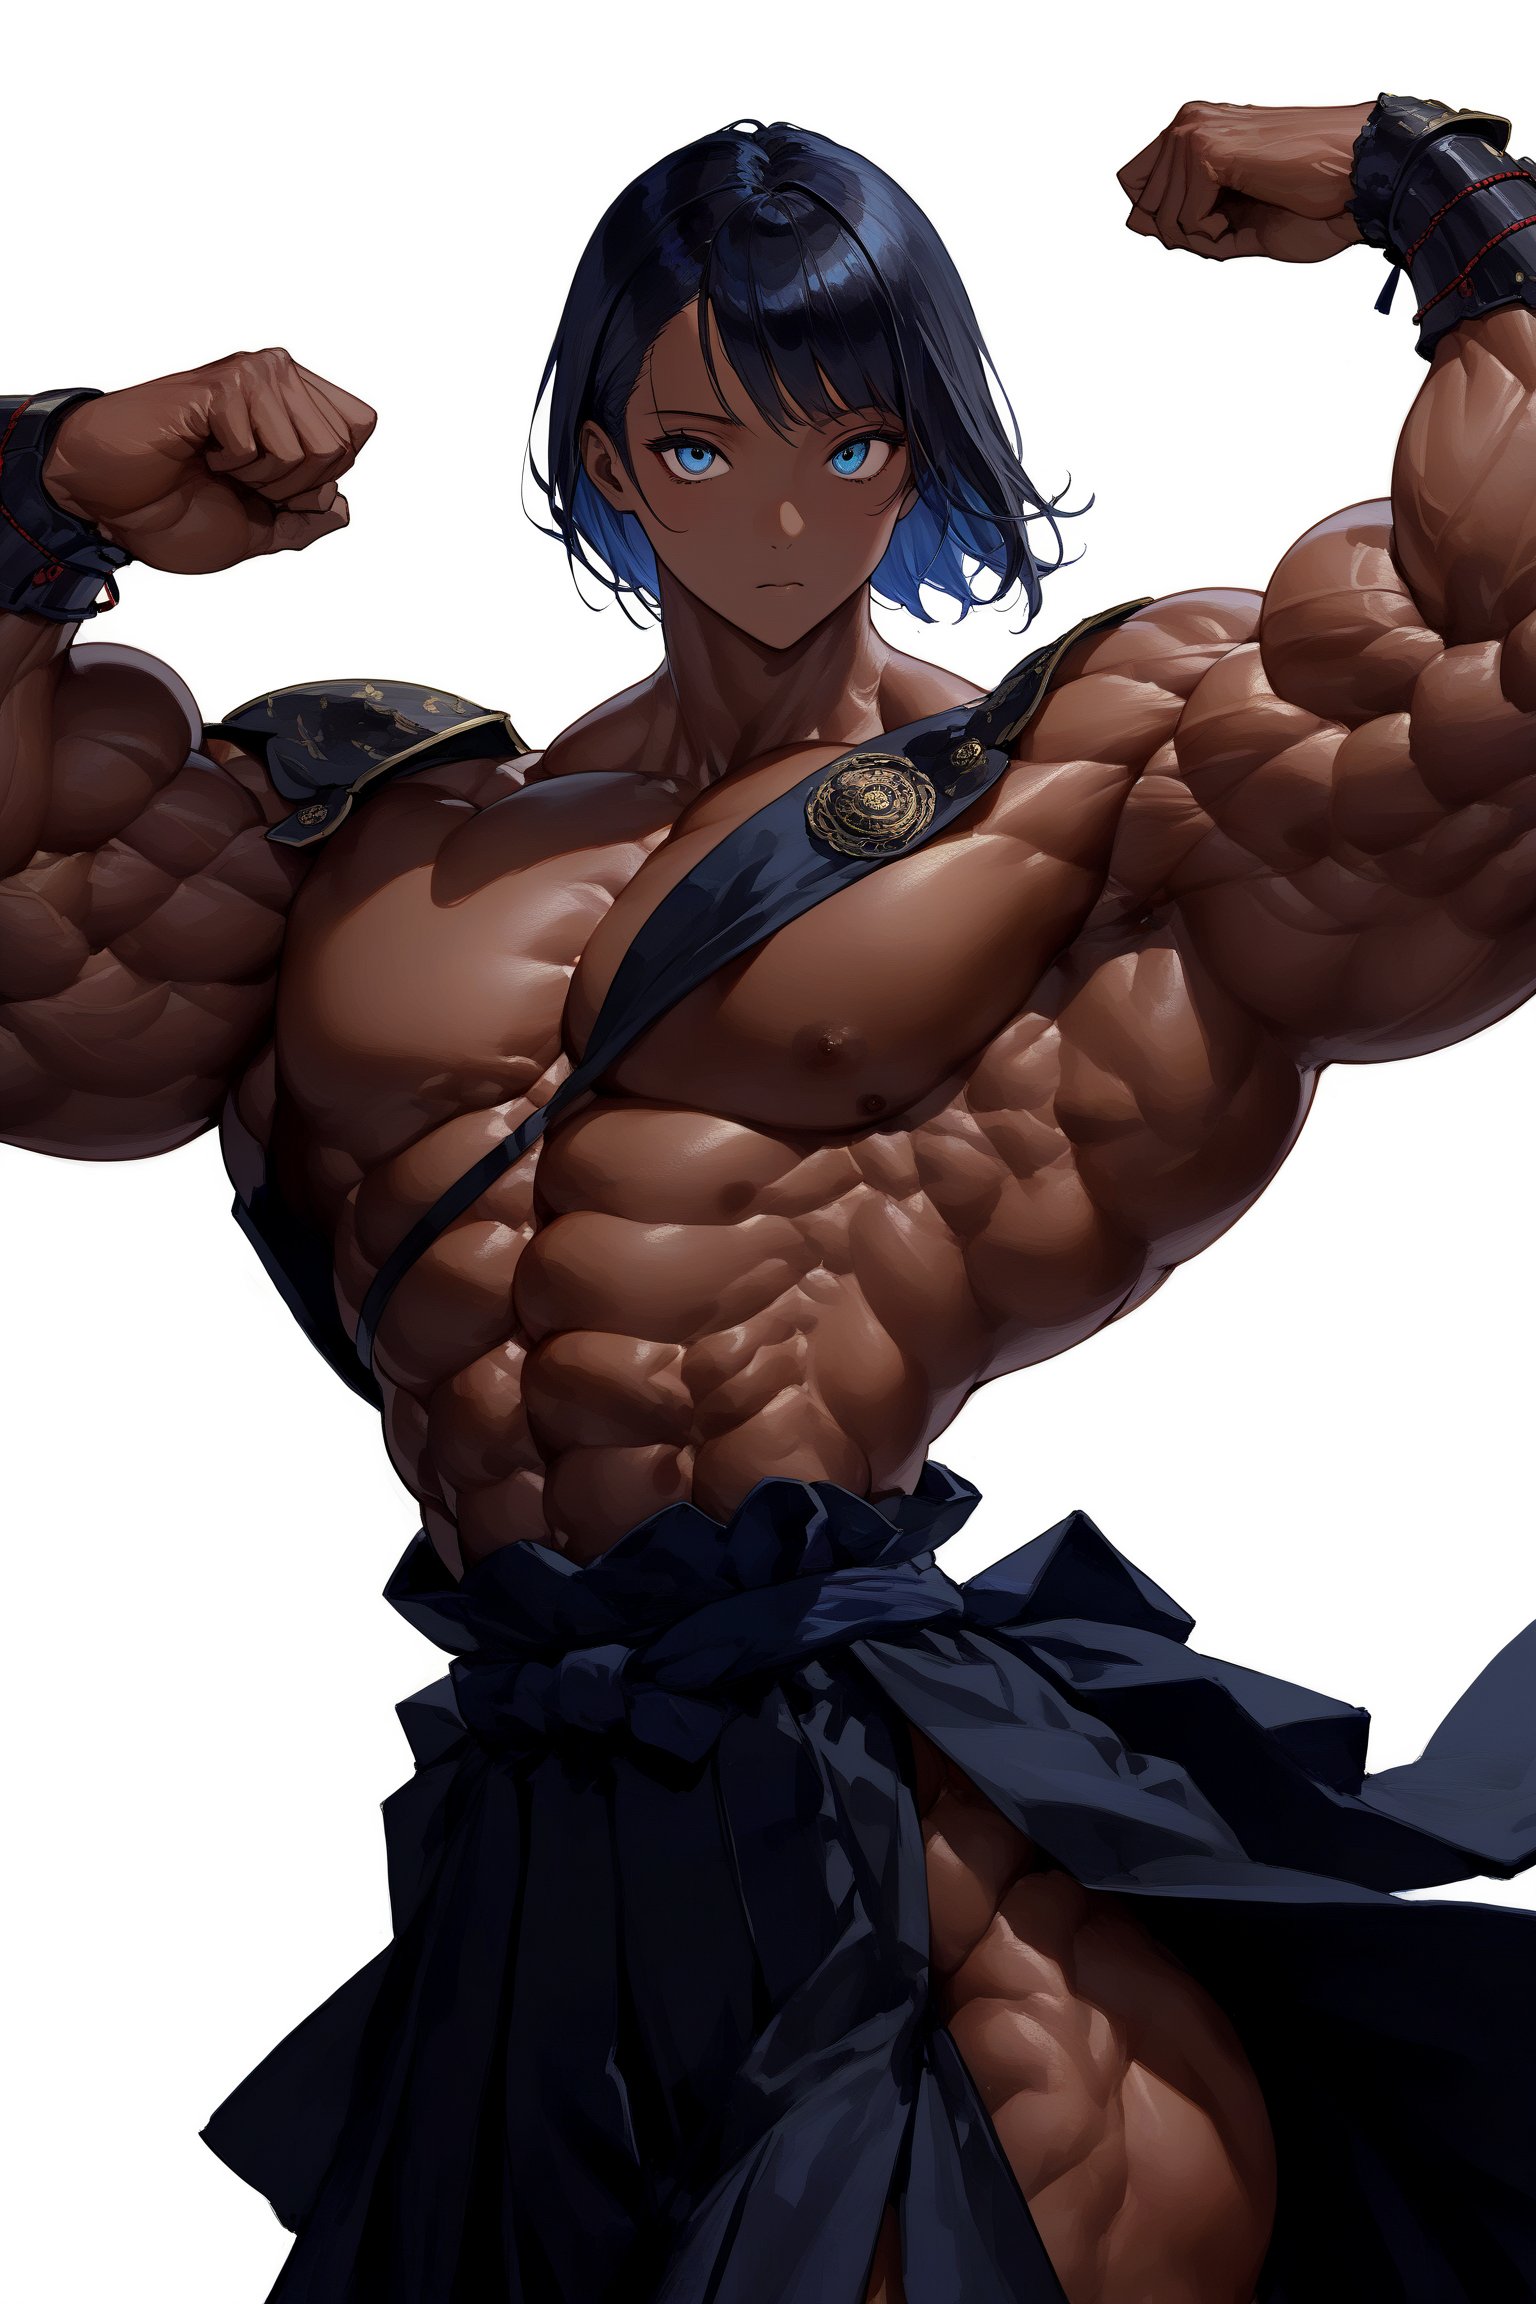 ((1man)),handsome young man, wearing samurai-style armor, long slit eyes, mysterious, narrow and captivating eyes, traditional Japanese armor reminiscent of a samurai, and a dark blue hakama.(((Super muscular body, amazing bulk body:1.5))),
Dark skin, open chest, beautiful collarbones,,warrior,samurai,emo,Realistic Blue Eyes,muscular_female